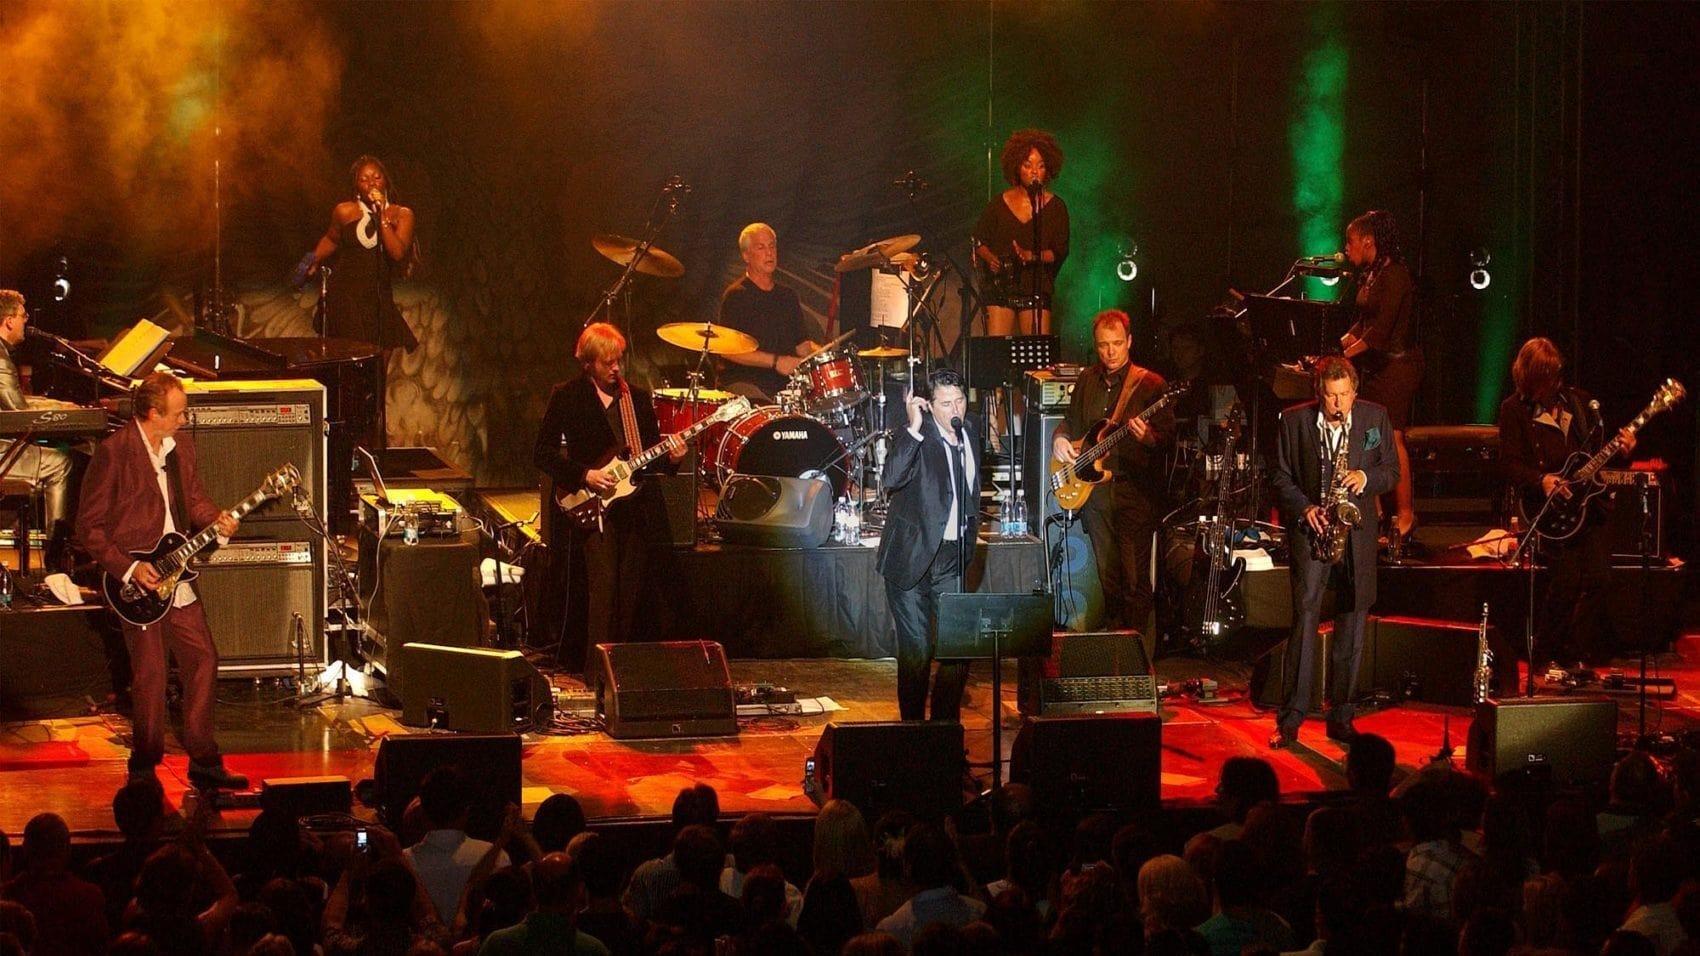 Bryan Ferry and Roxy Music: A Musical History backdrop